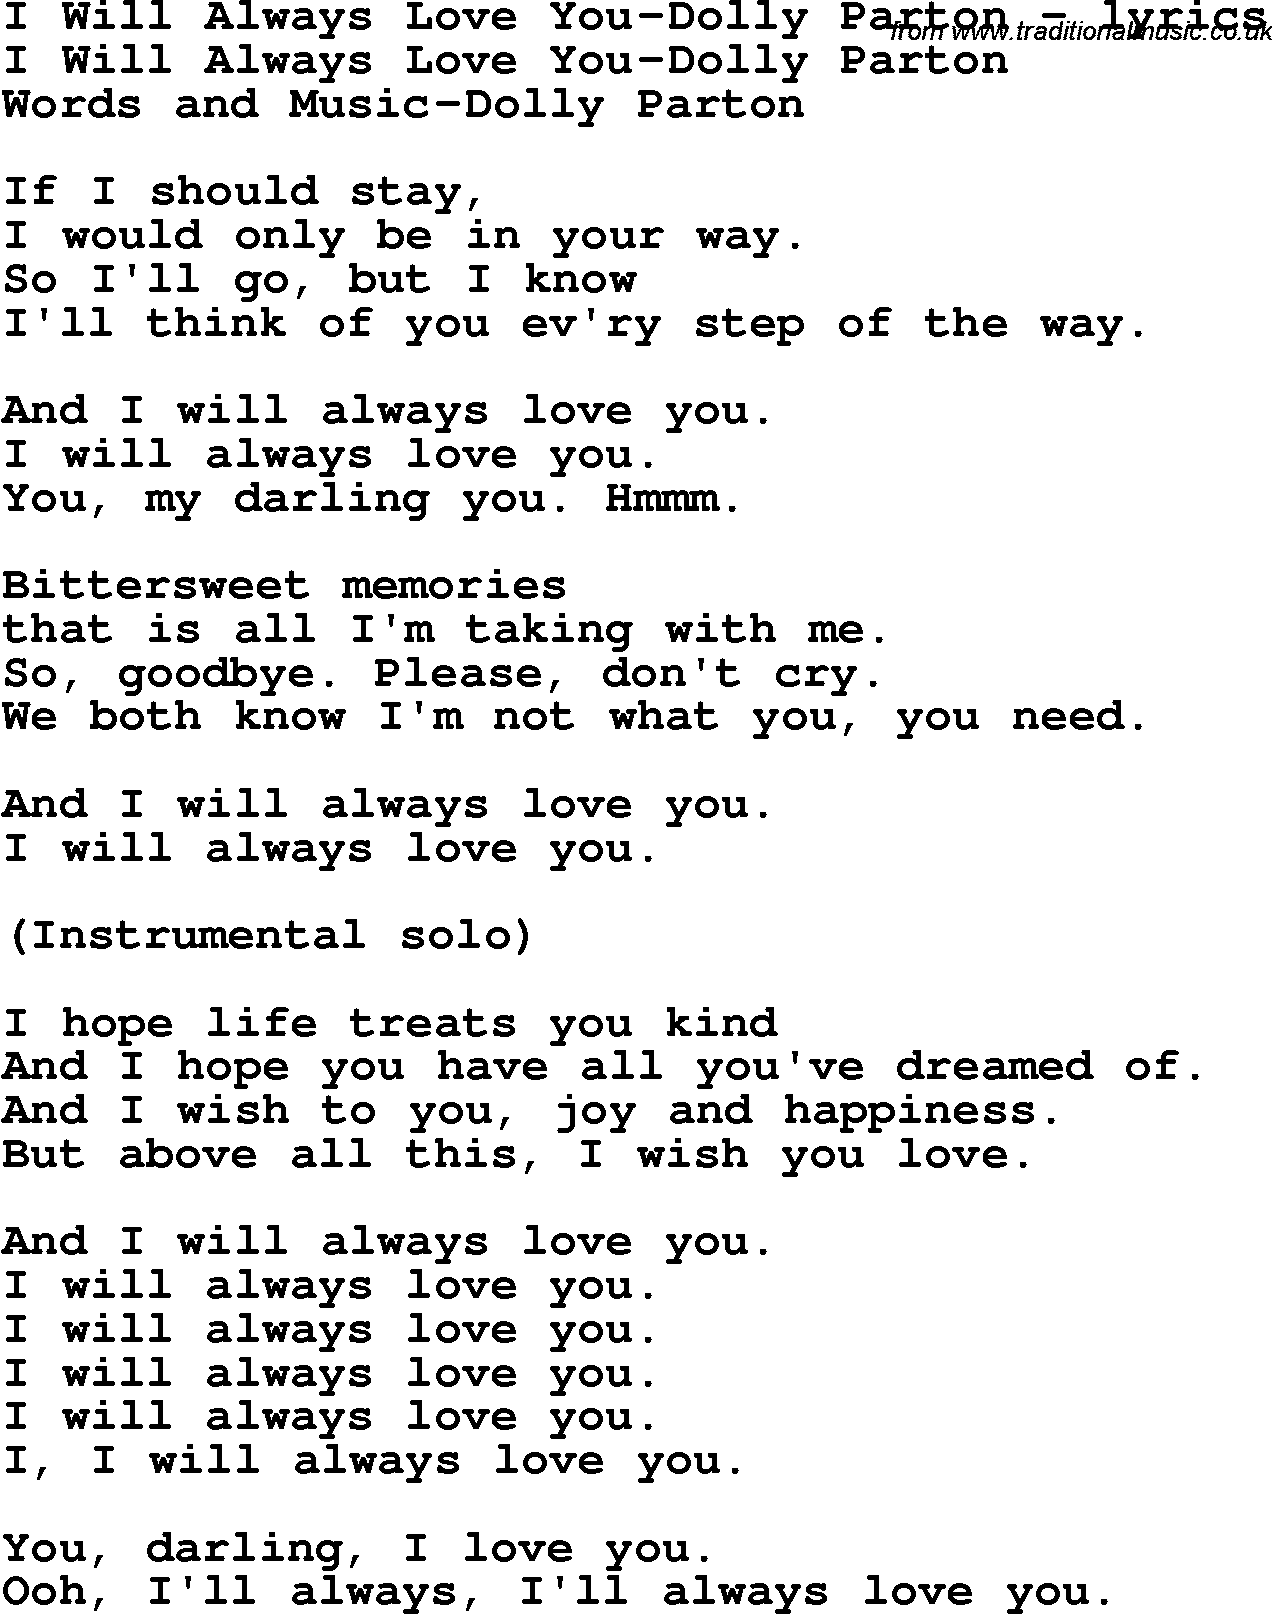 Love Song Lyrics for: I Will Always Love You-Dolly Parton